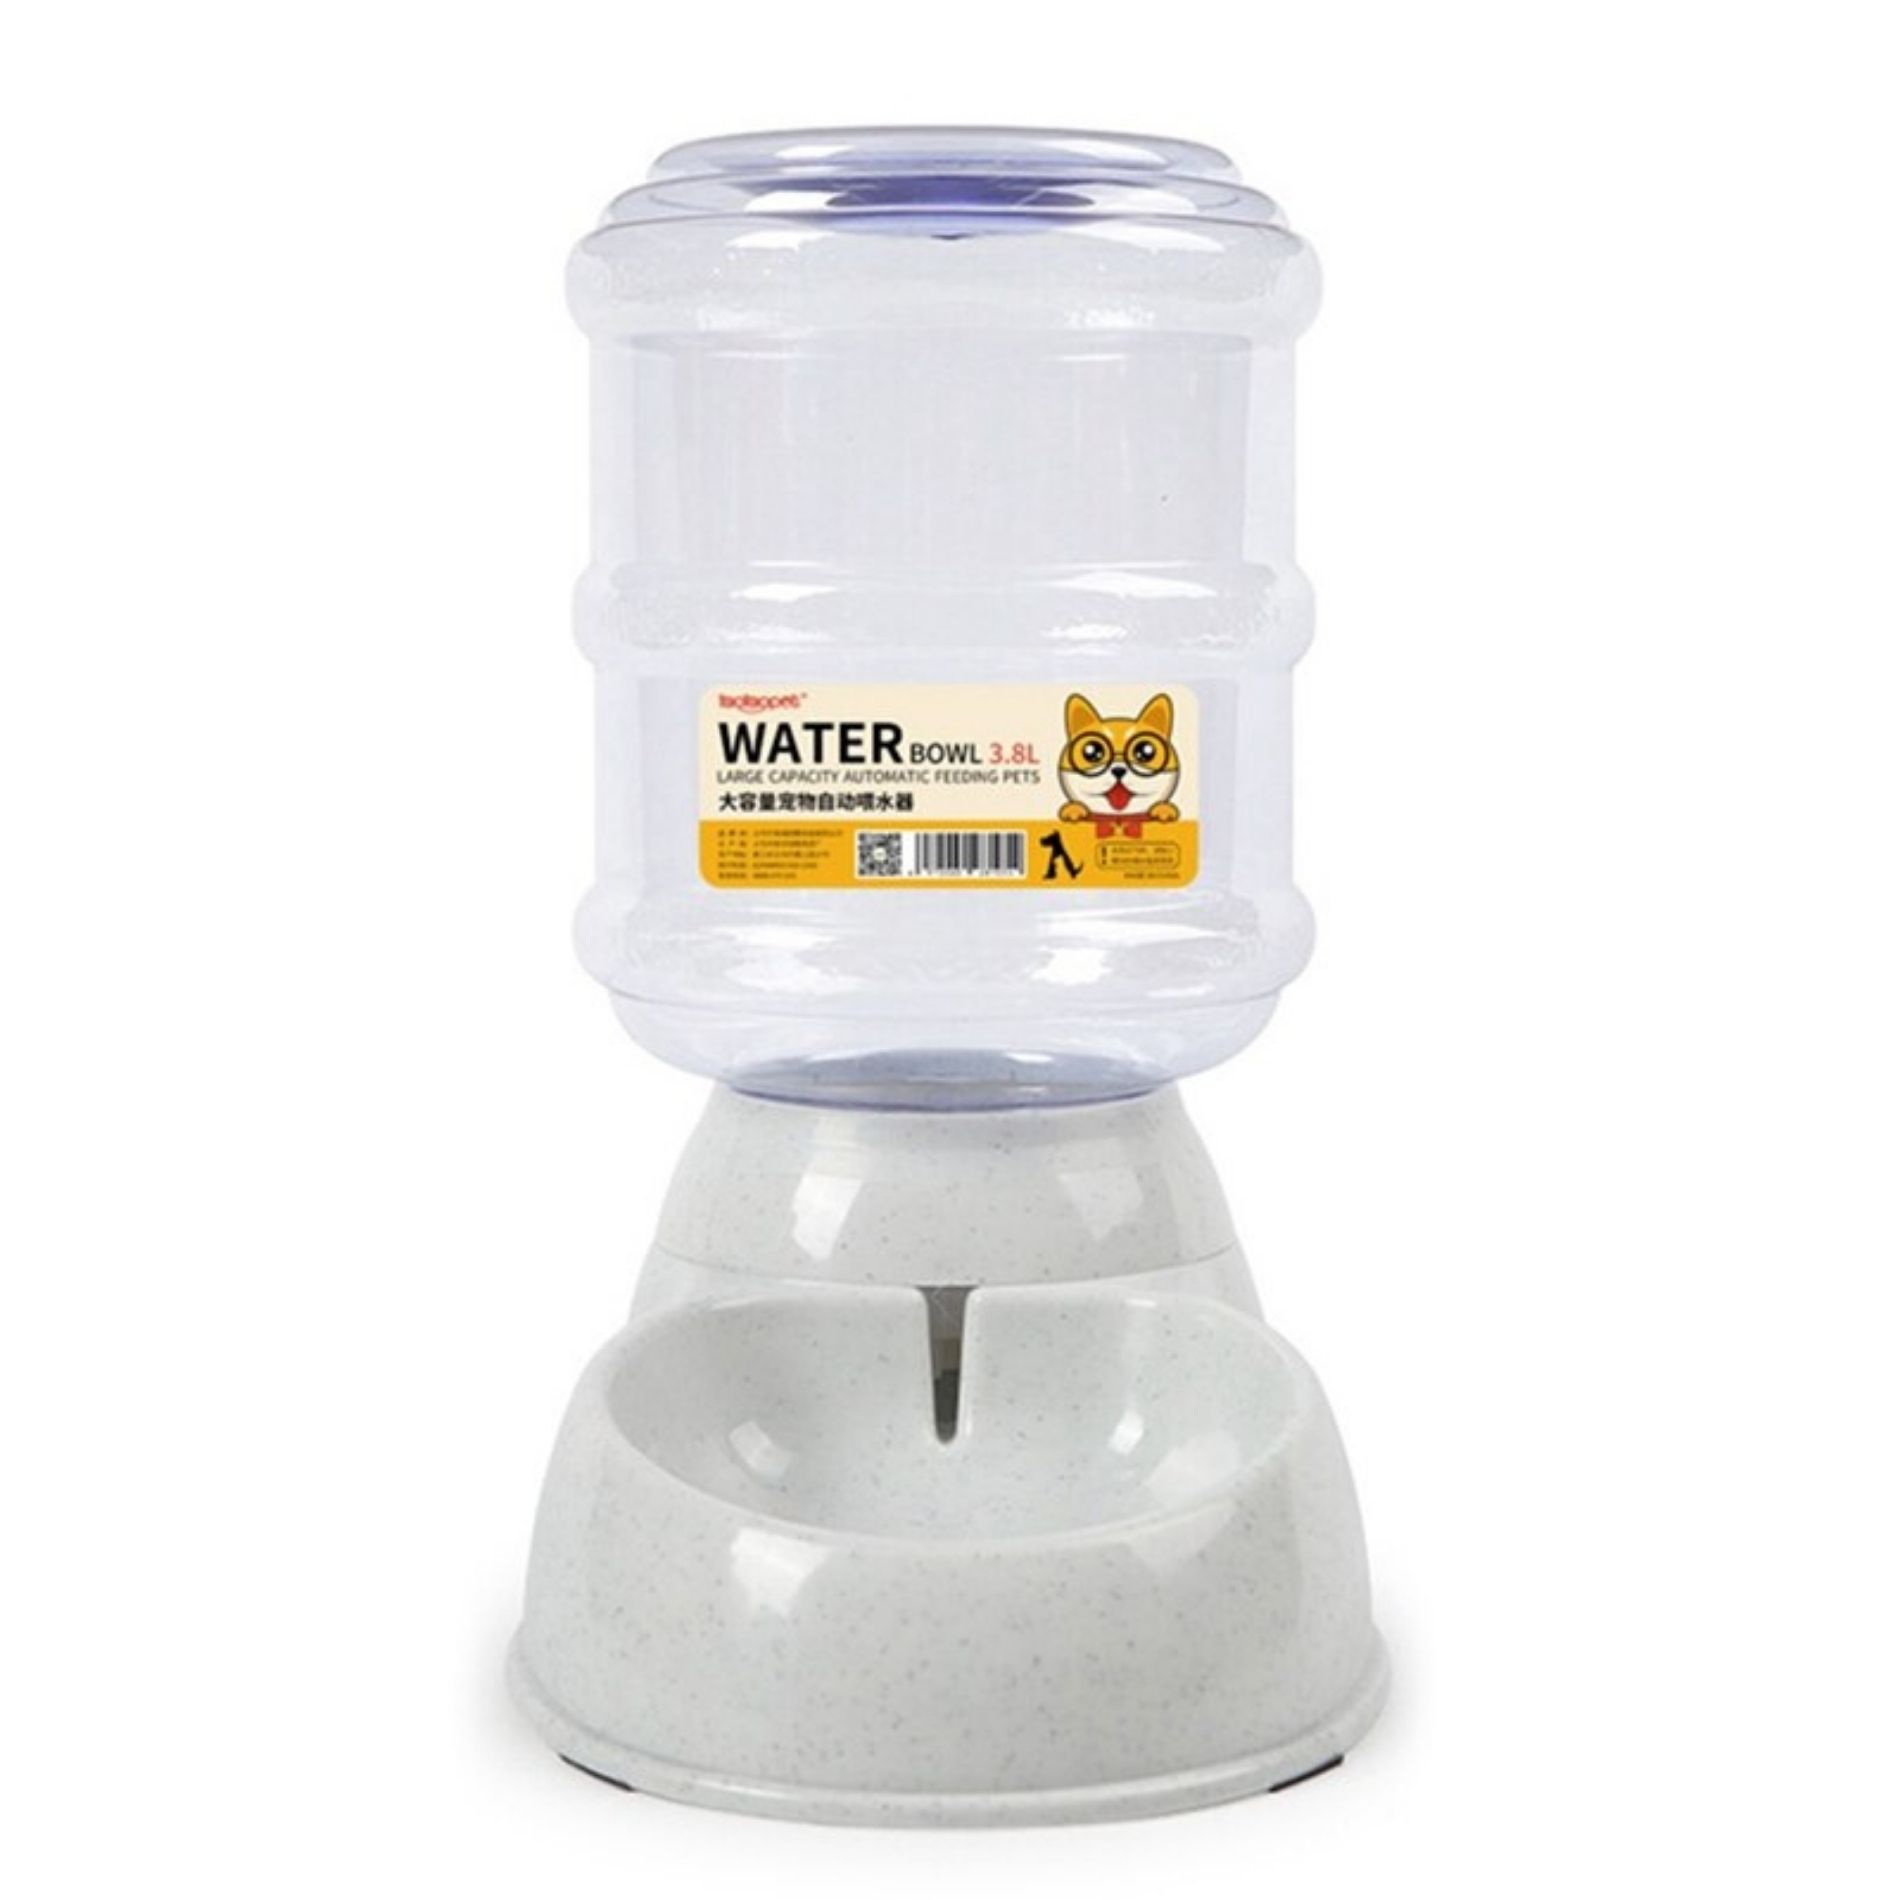 READY STOCK 3.8L Pet Auto Food Feeder And Water Feeder Anjing Kucing Makanan Food Auto Drinker Water Bowl